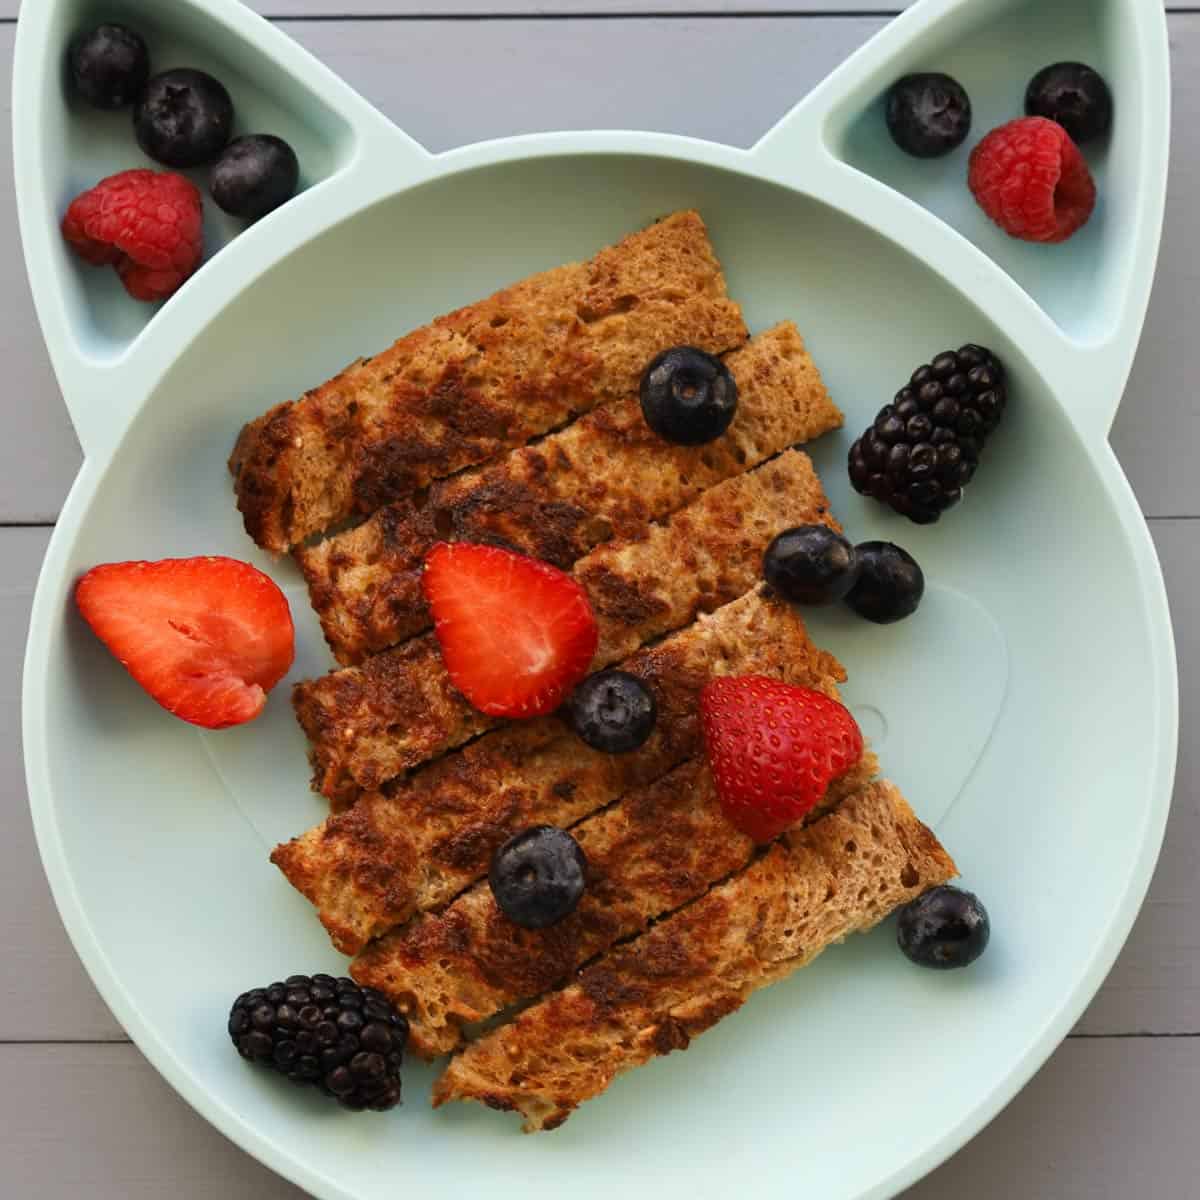 https://apeachyplate.com/wp-content/uploads/2020/12/french-toast-for-babies-cut-Square-S.jpg